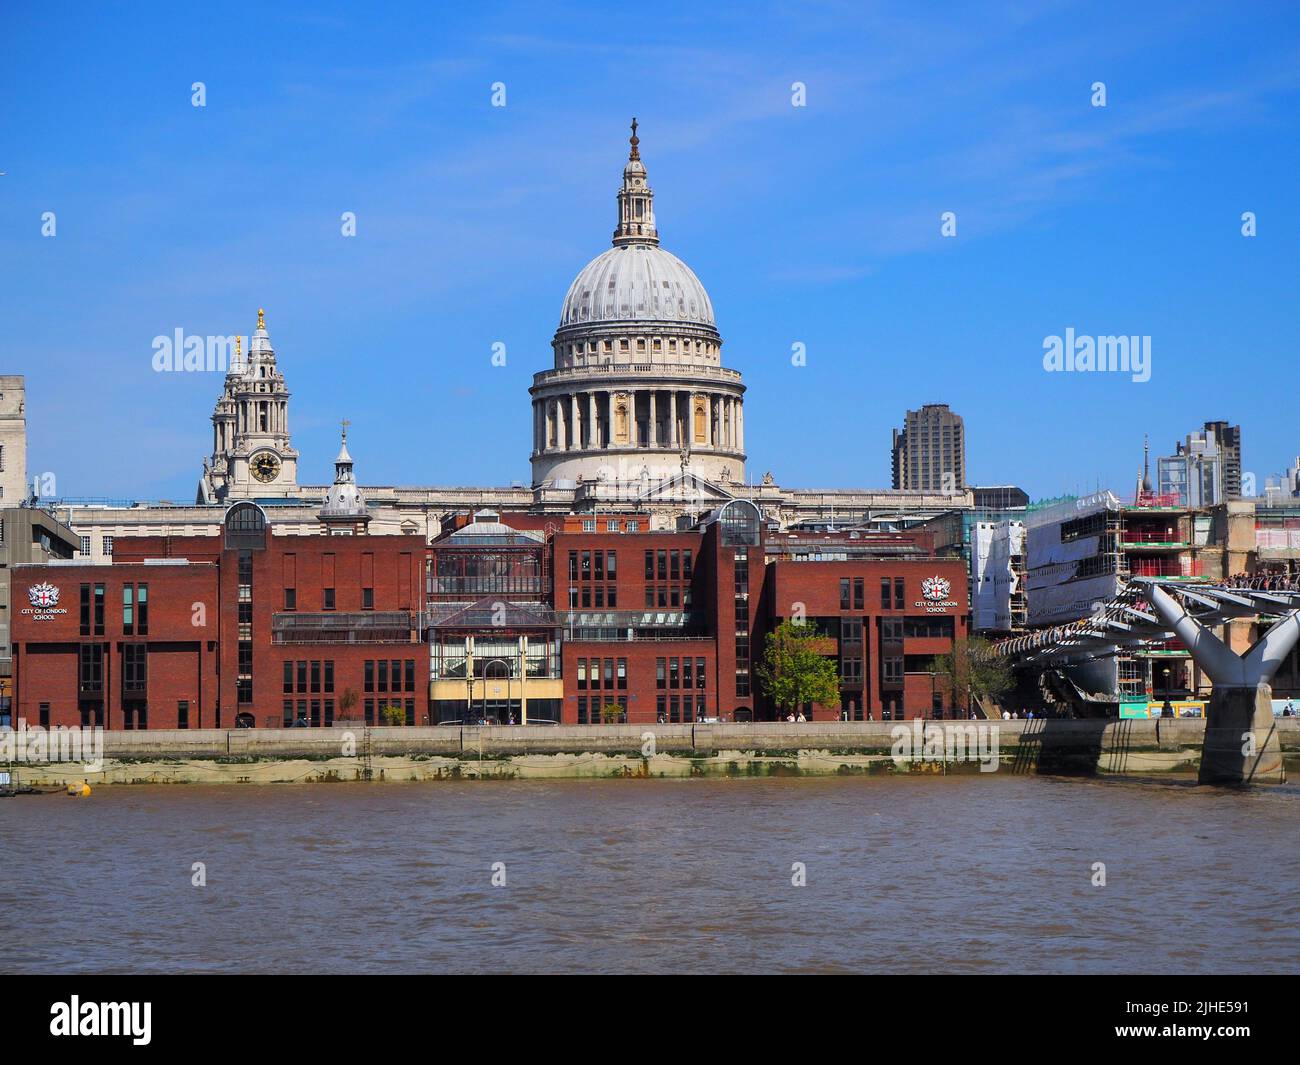 A beautiful shot of St Paul's Cathedral and Millennium Pedestrian Bridge in London, United Kingdom Stock Photo